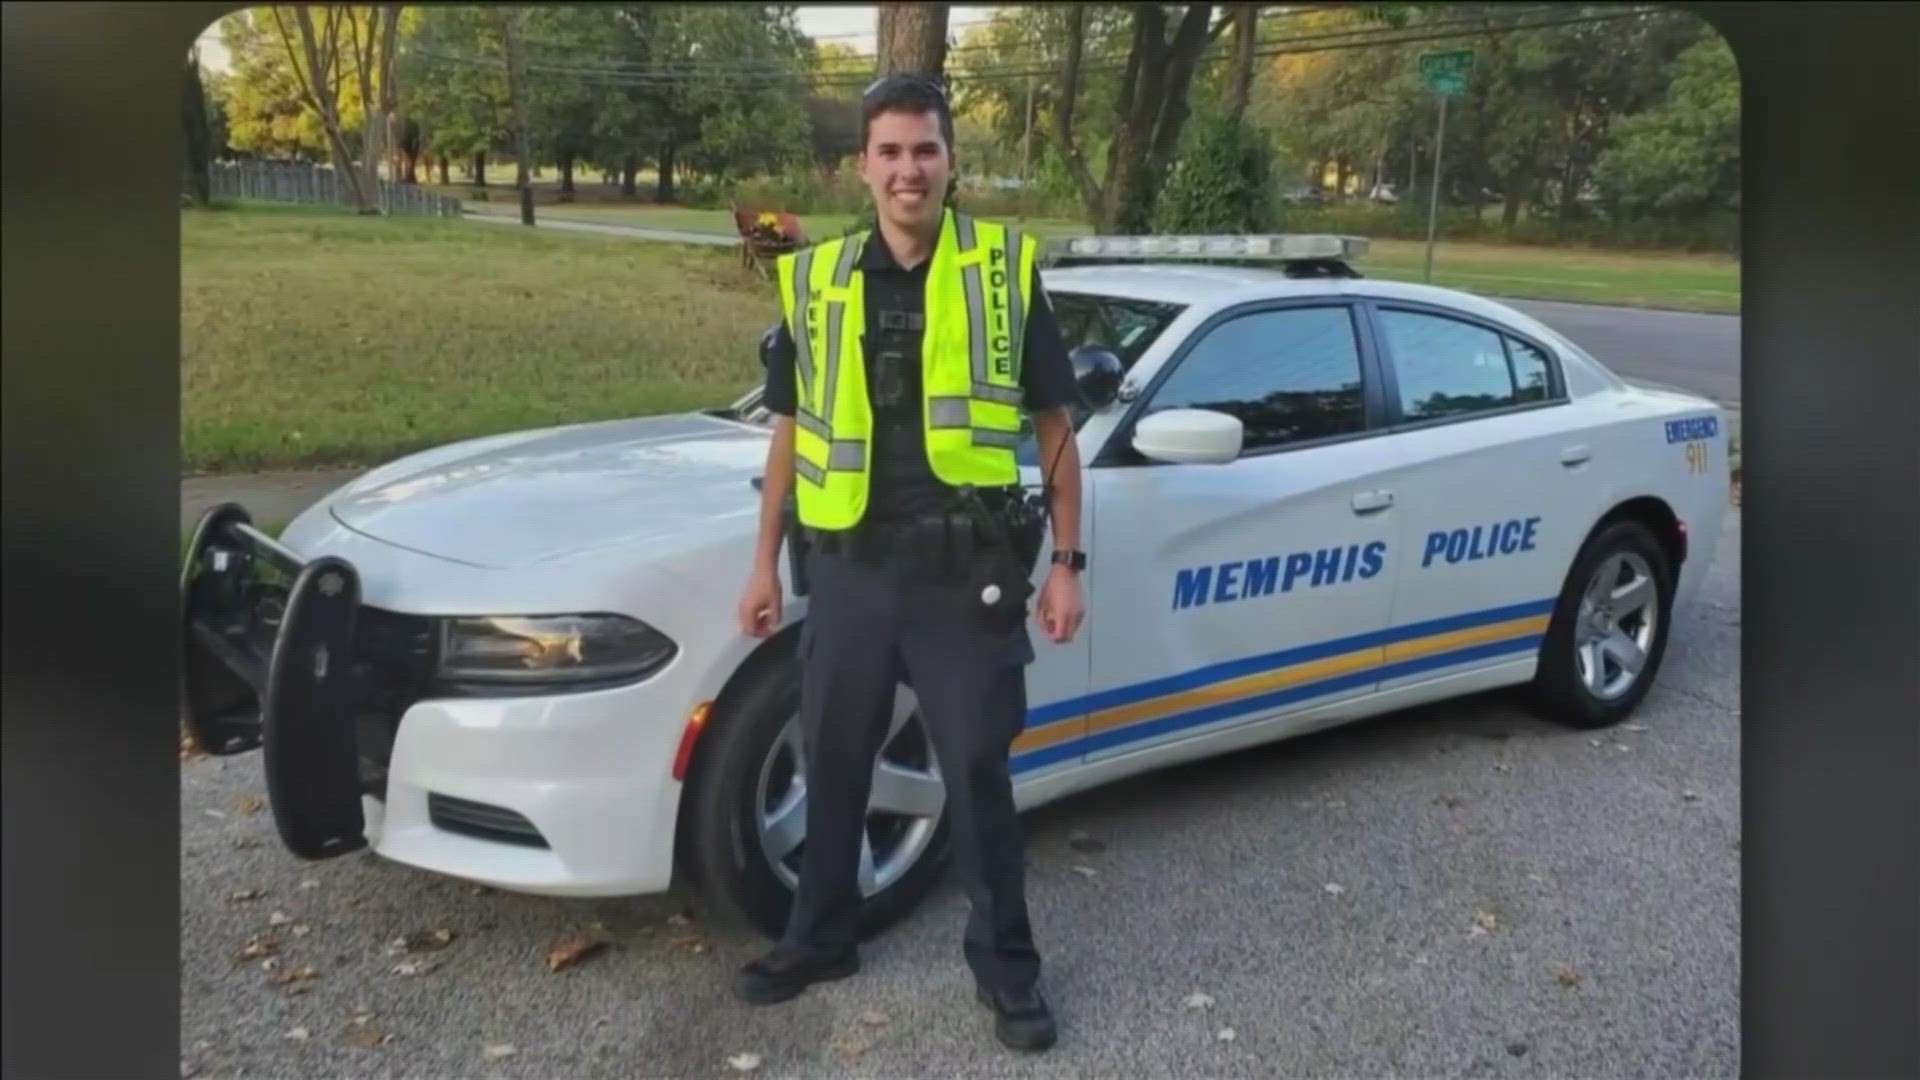 Joseph Russell "Rusty" McKinney served out of Raines Station, joining the Memphis Police Department in 2021.